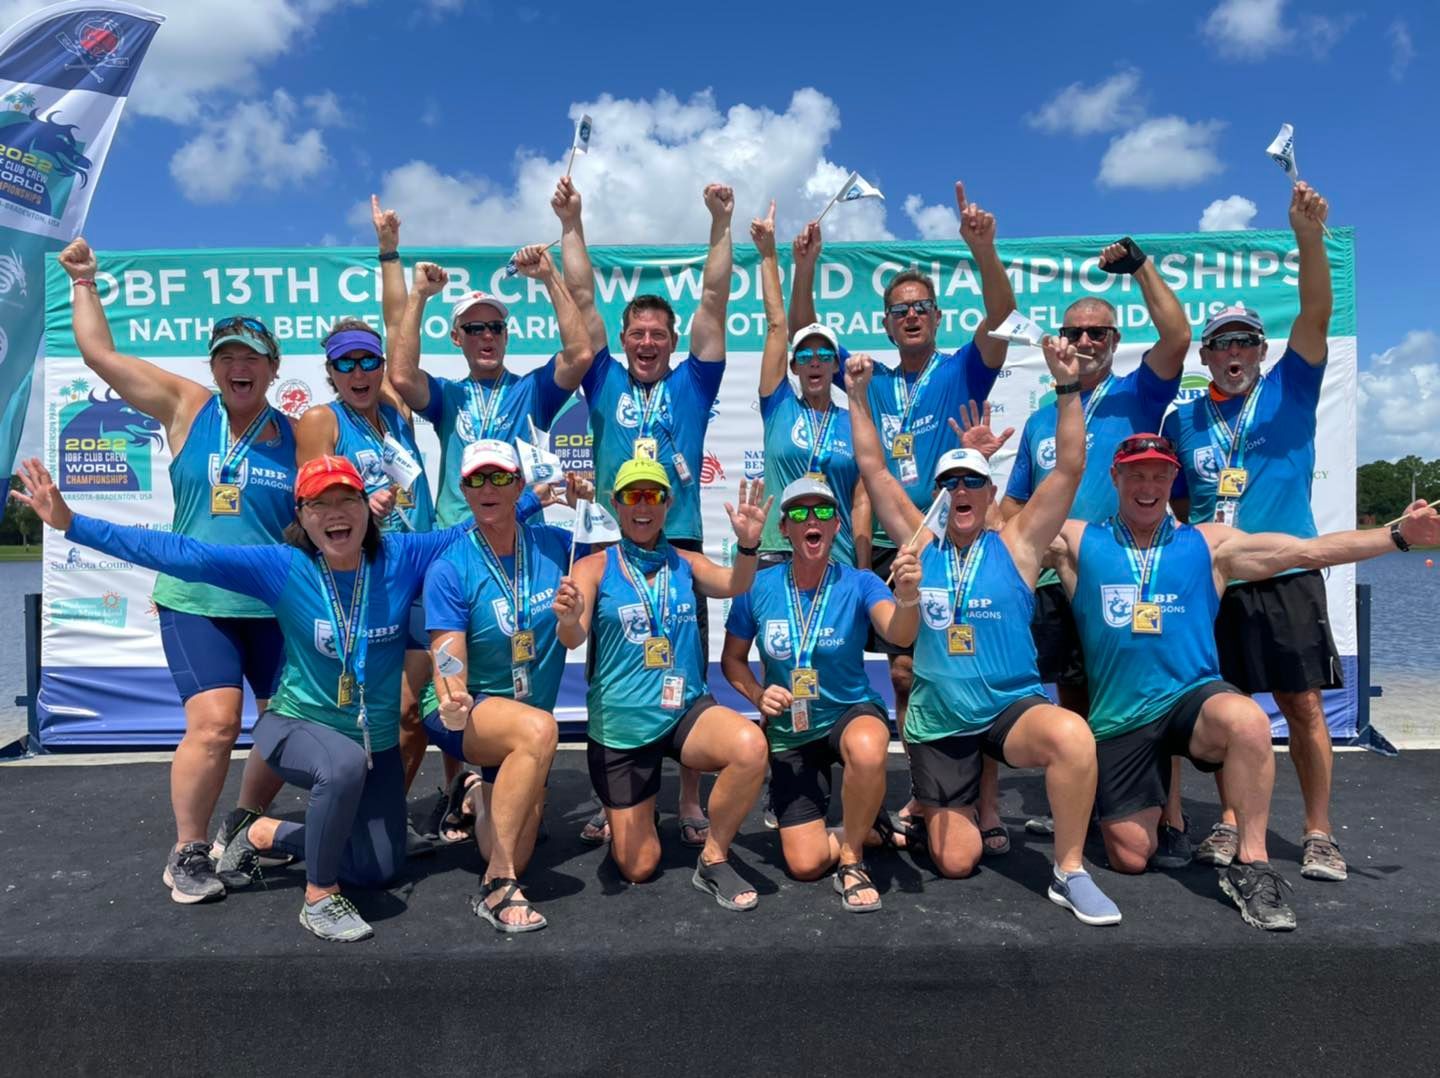 The NBP Dragons Senior B Mixed team (men and women) celebrates its gold in the 500 meters Short Boat Division. The gold was determined by aggregate time in three heat races. Photo courtesy Nathan Benderson Park Conservancy.